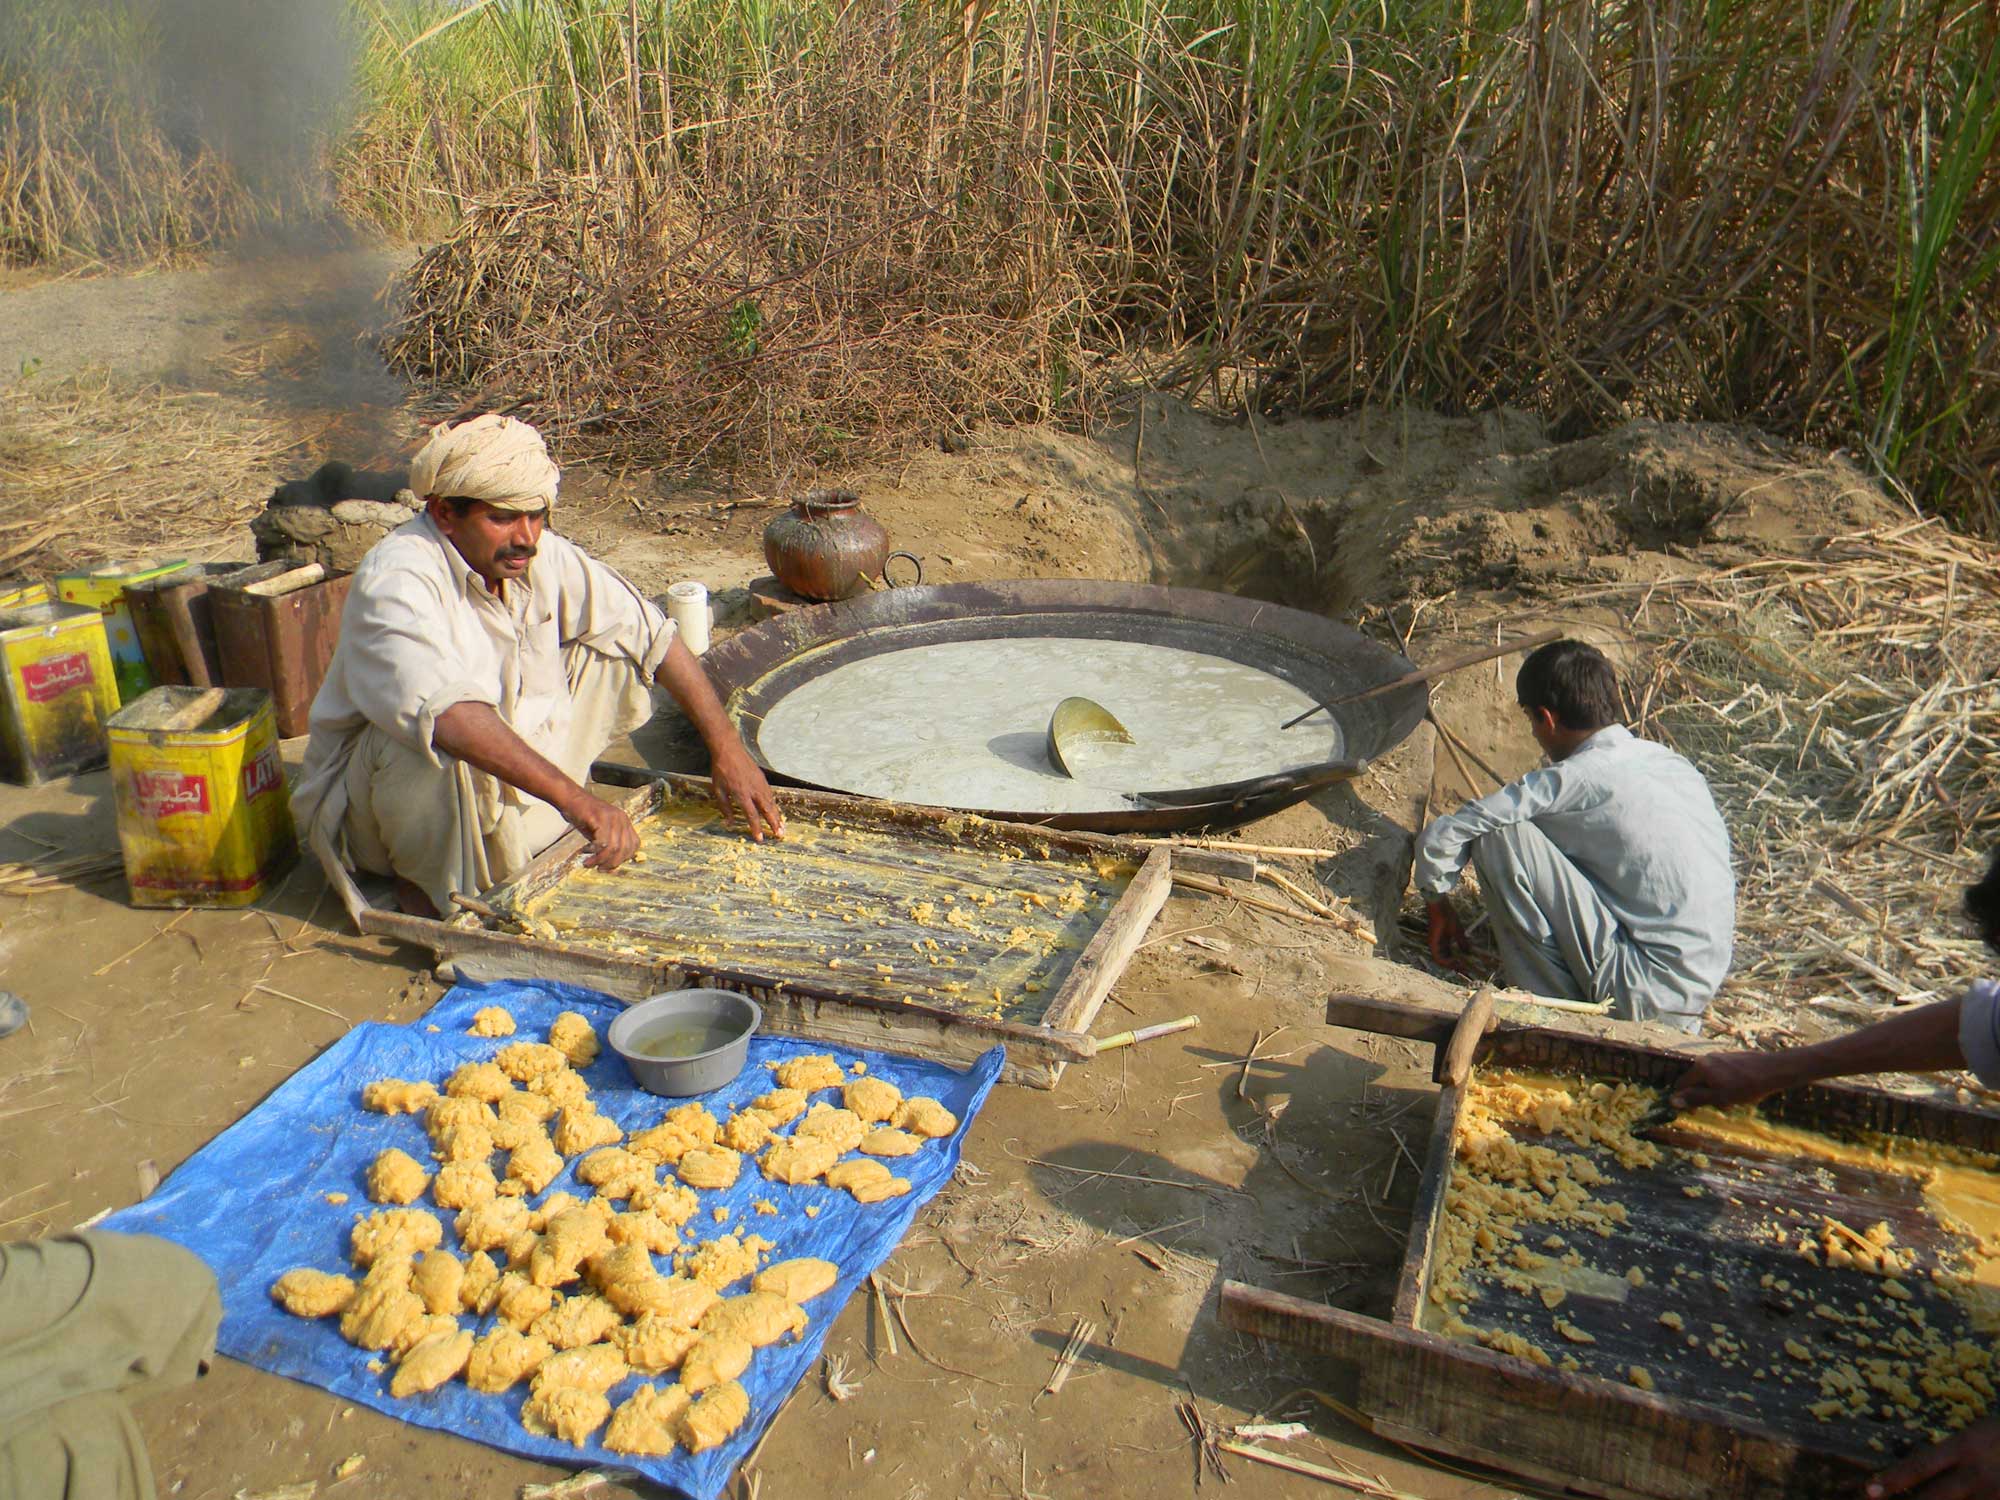 Photograph of a man and a boy producing jaggery in Punjab, Pakistan. The photo shows a man squatting on the ground in front of a large jaggery mold. In the background, a pan of cooking cane juice with a ladle resting in it can be seen. In the foreground, lumps of jaggery sit on a blue tarp. 